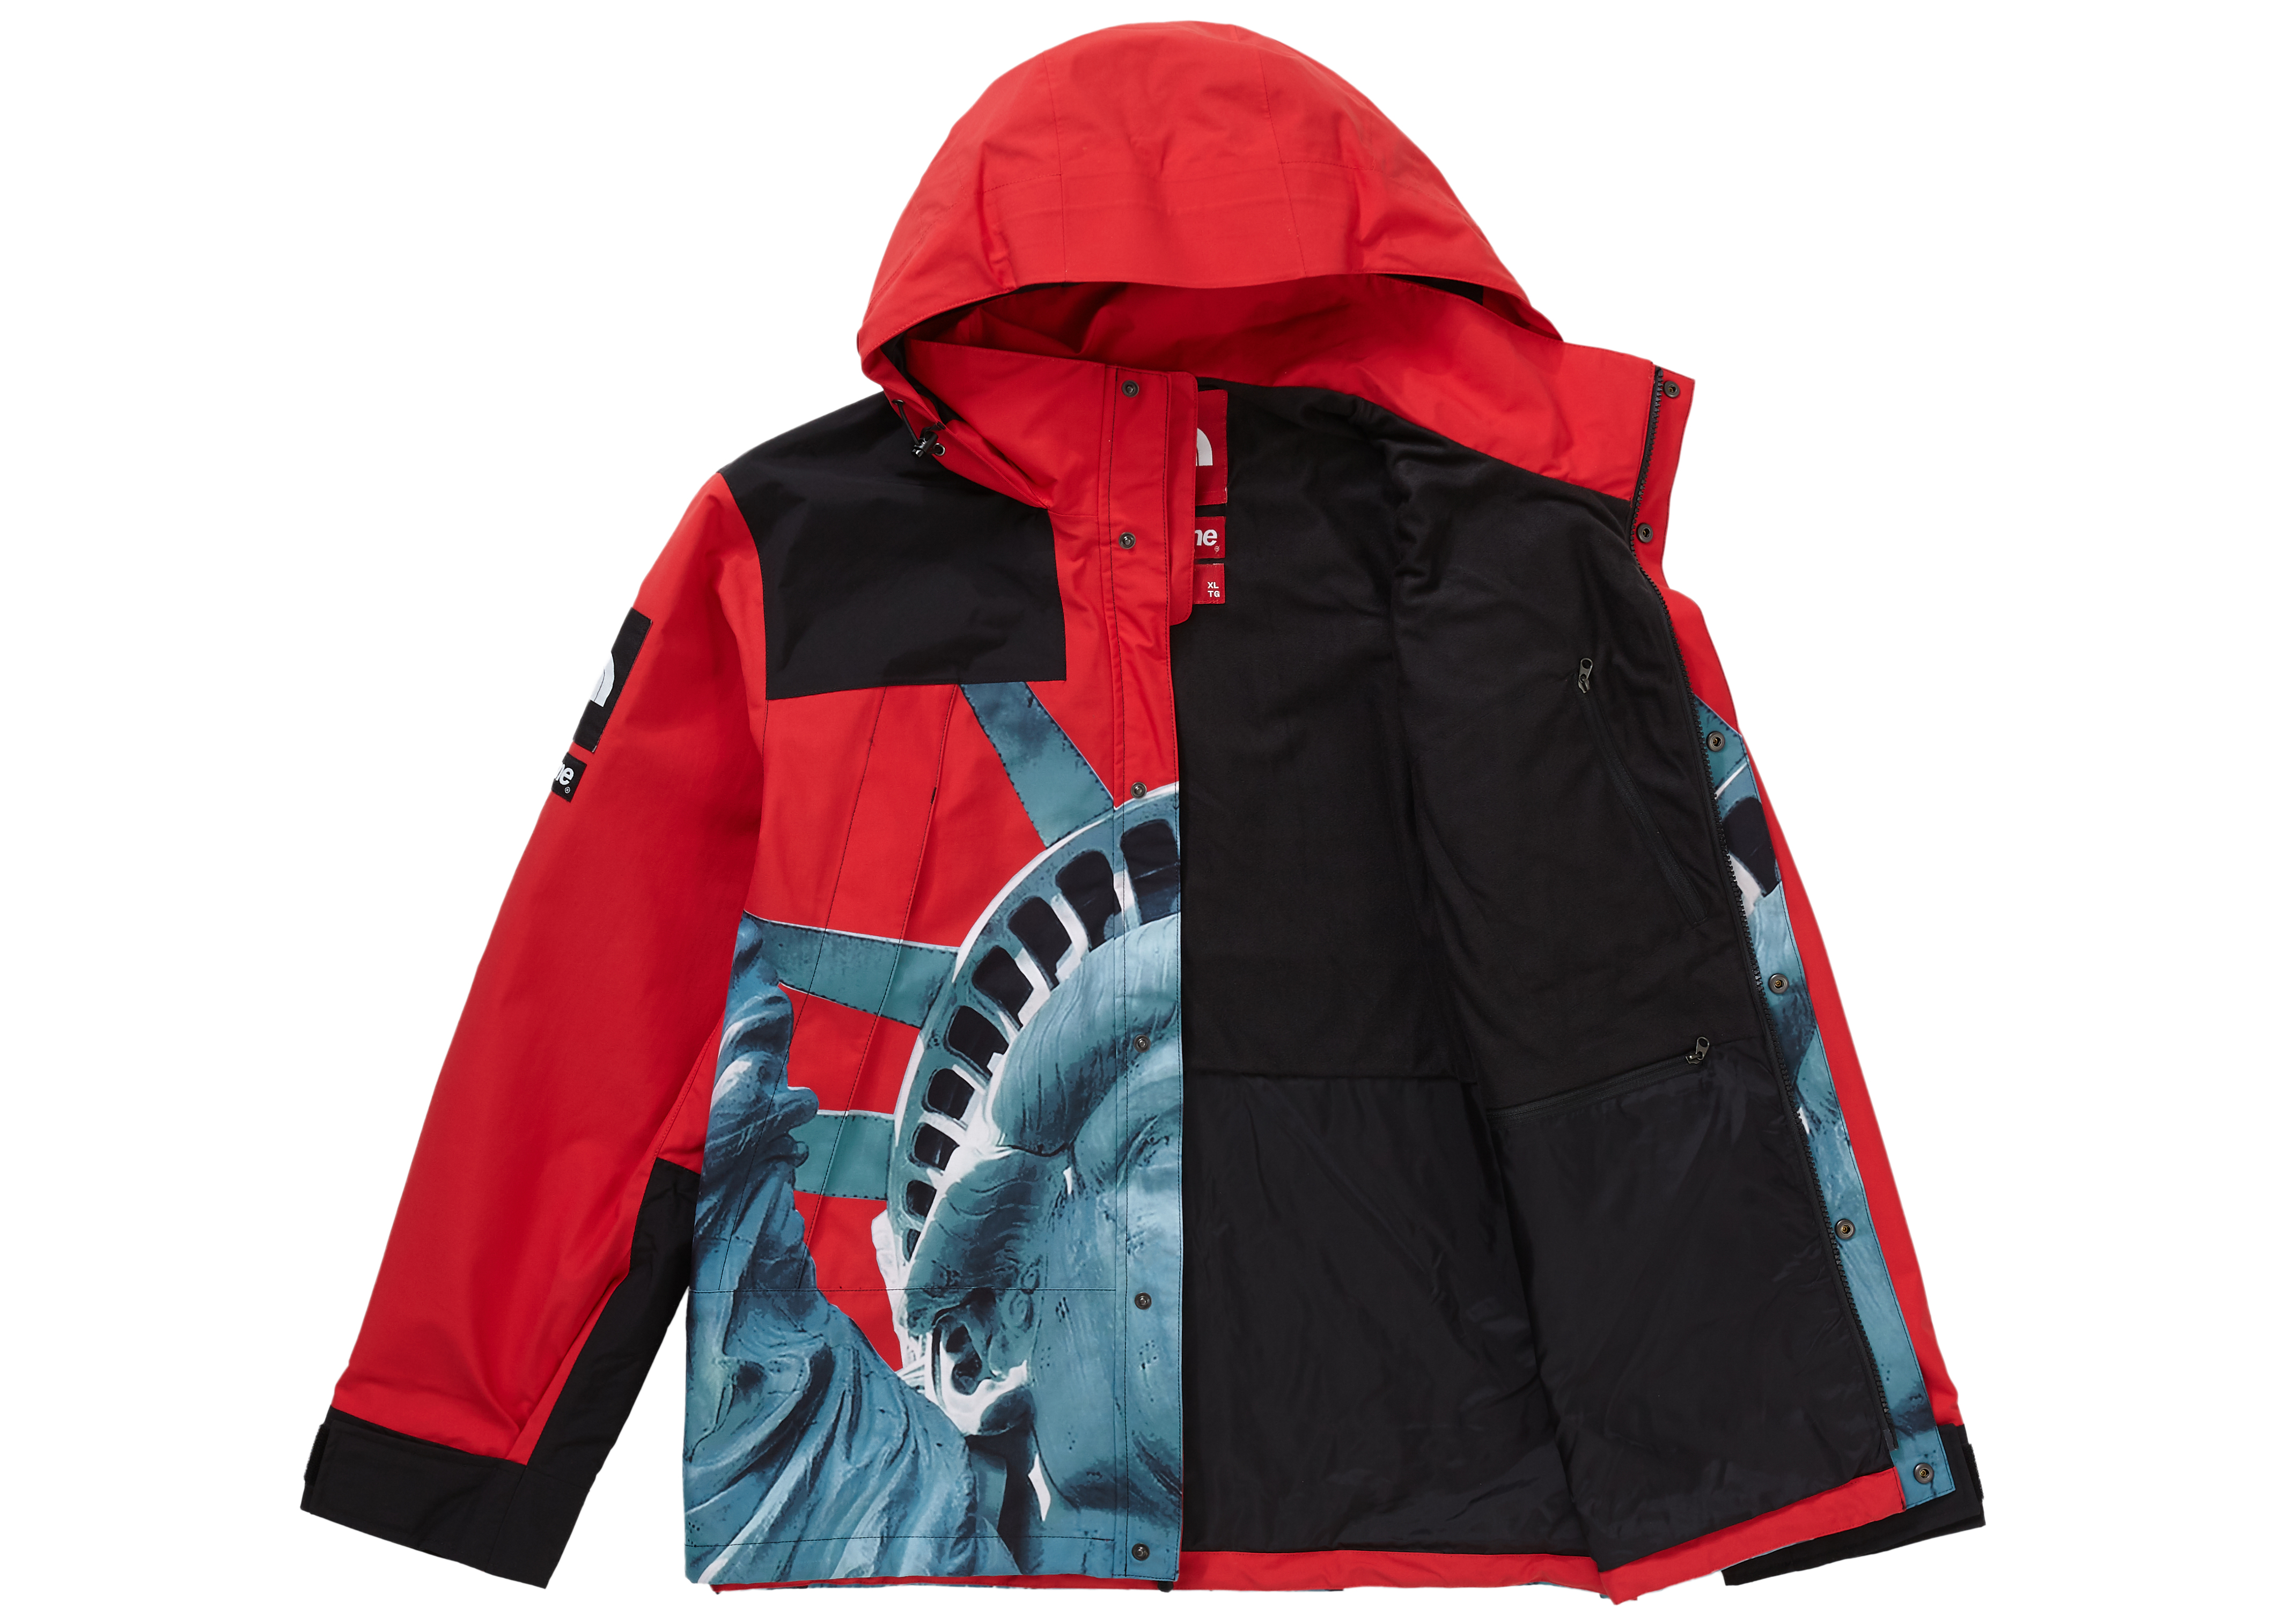 Supreme The North Face Statue of Liberty Mountain Jacket Red Men's 